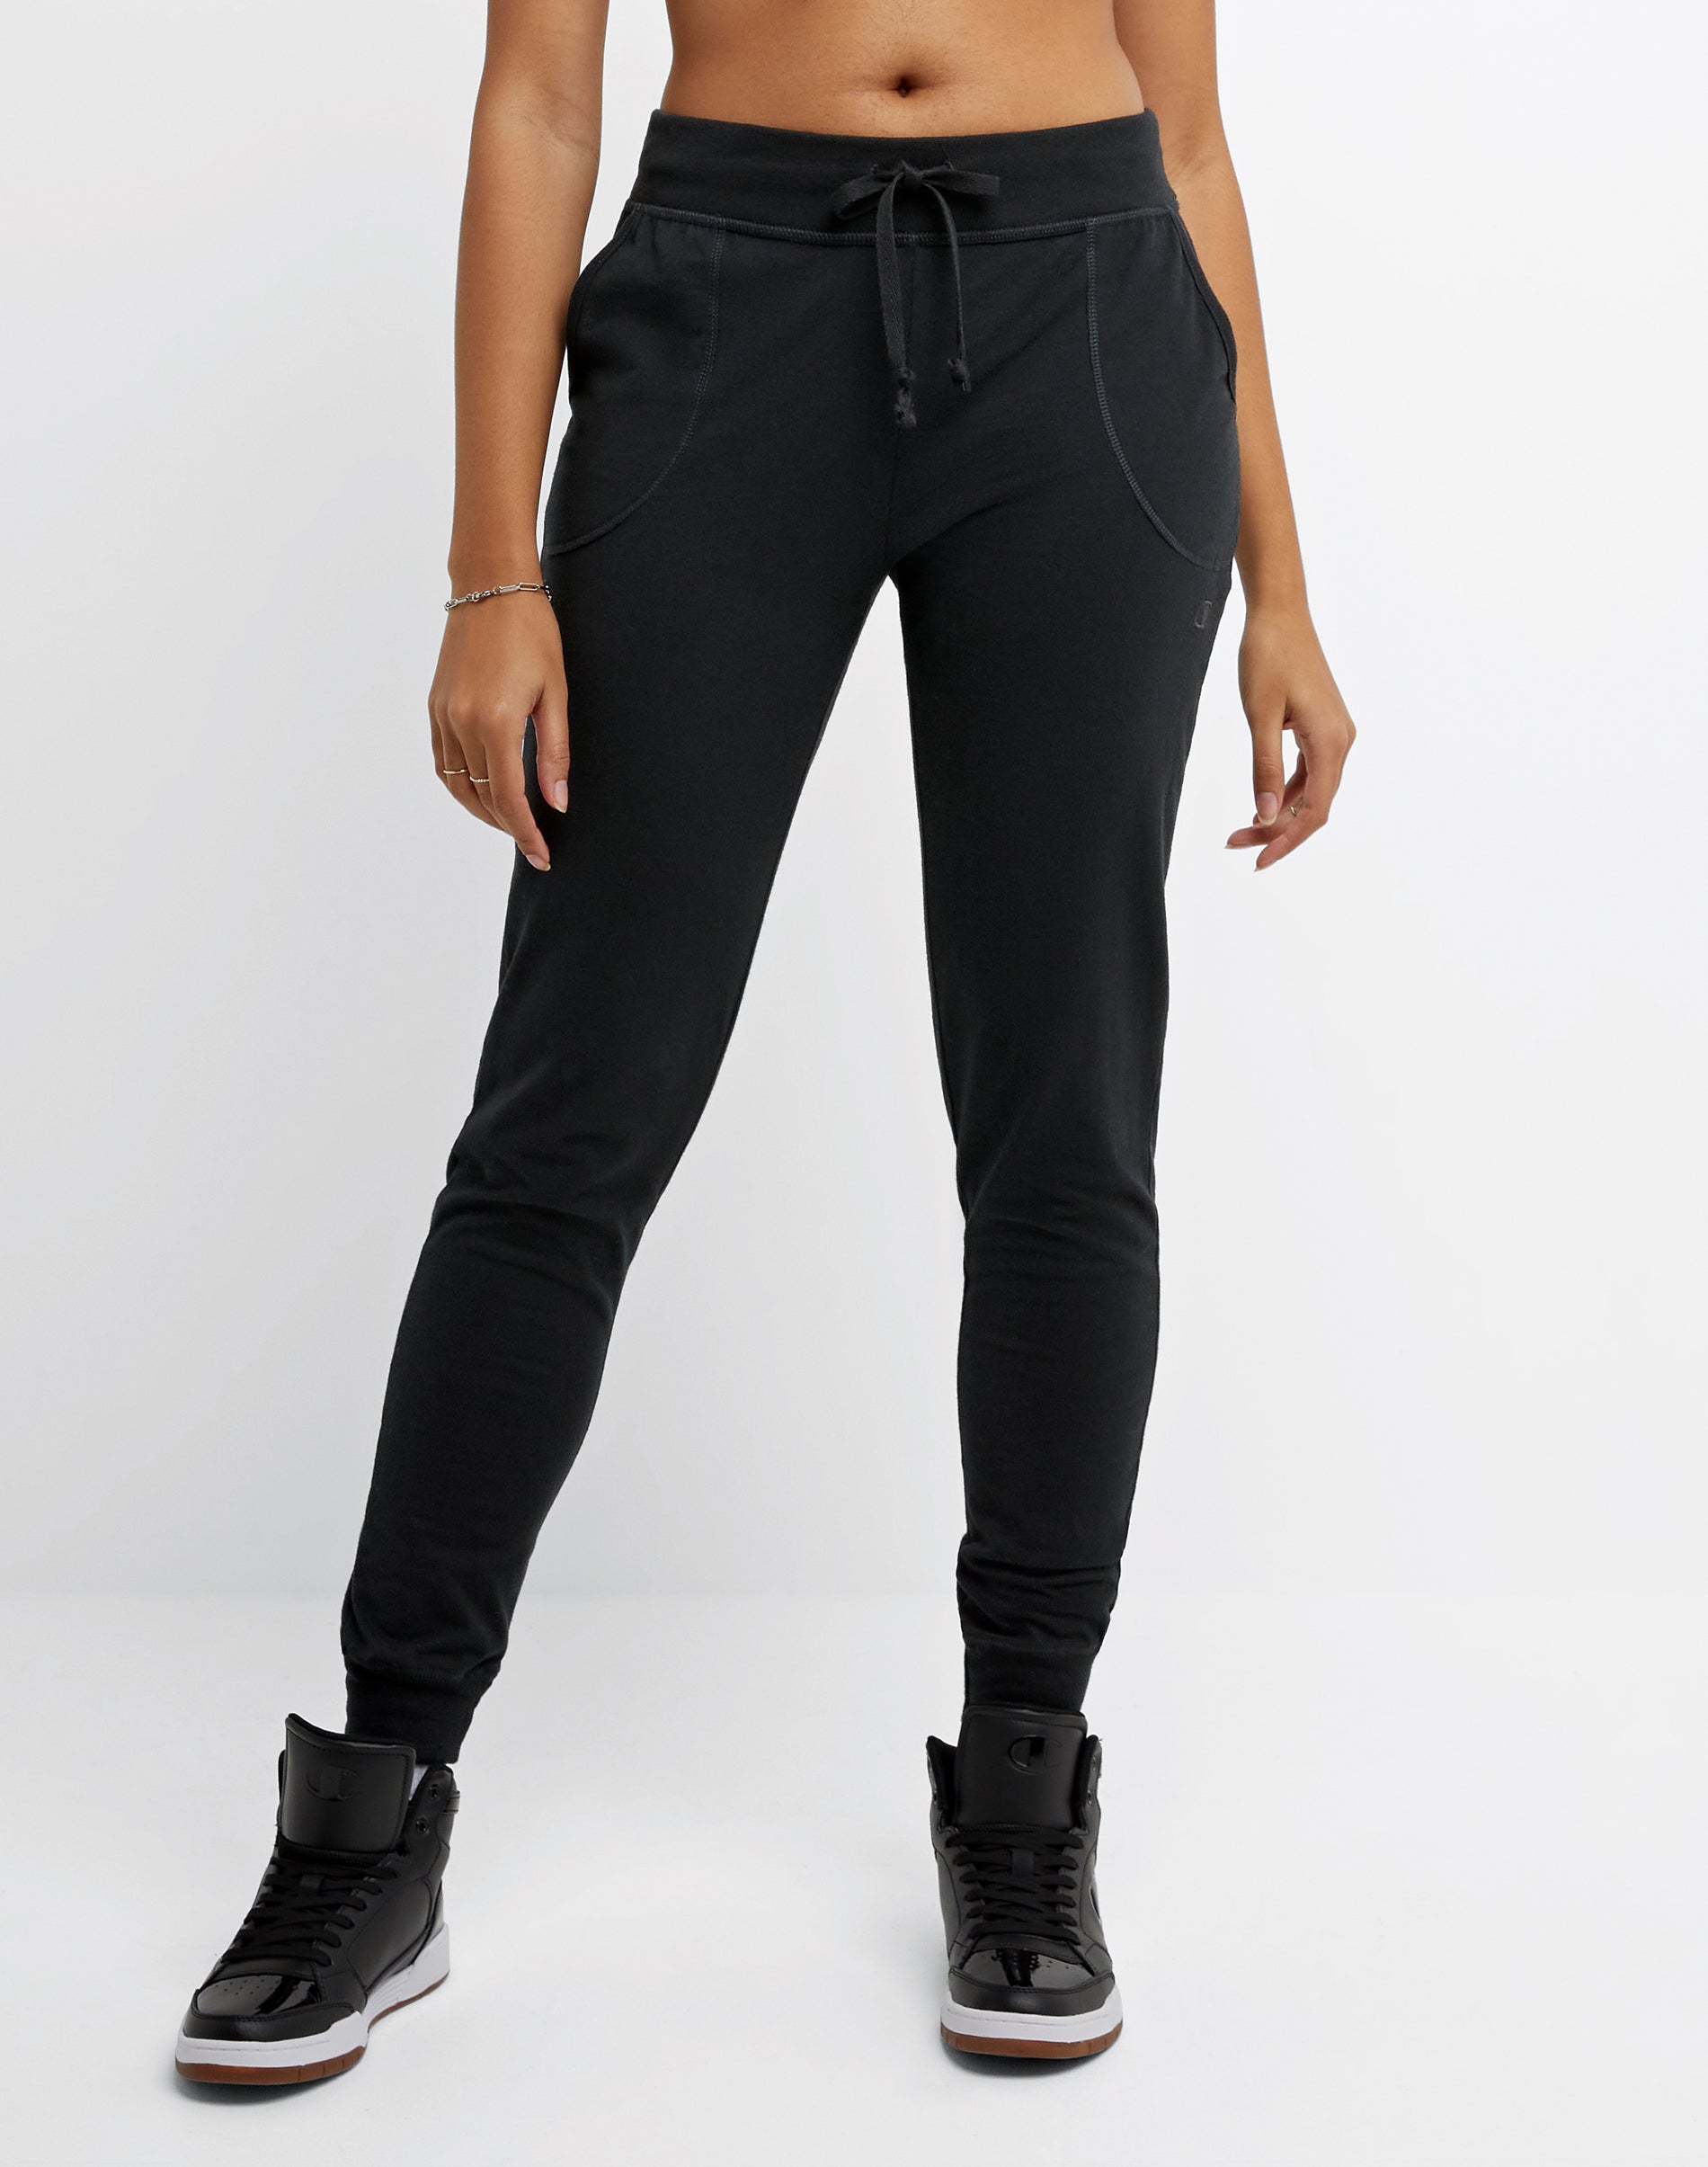 Champion pants women: Elevating Comfort and Style插图4